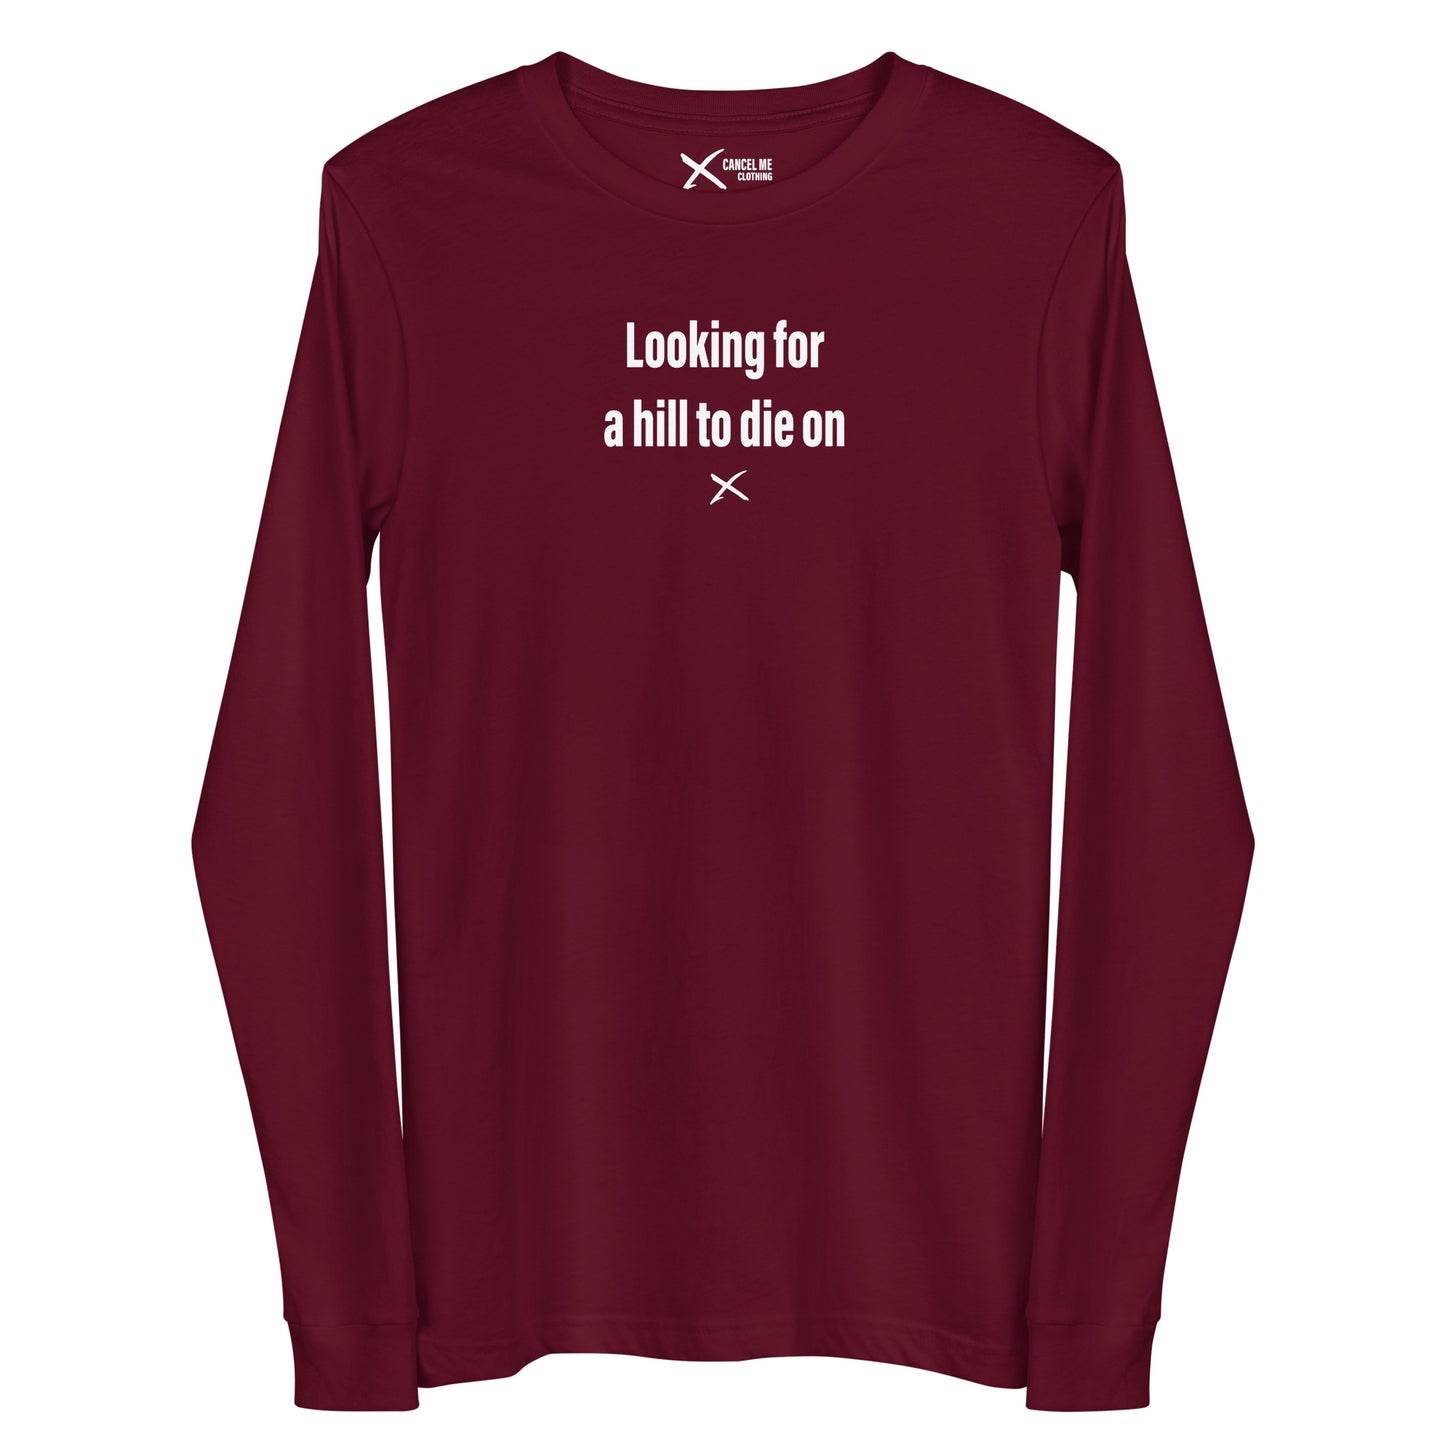 Looking for a hill to die on - Longsleeve